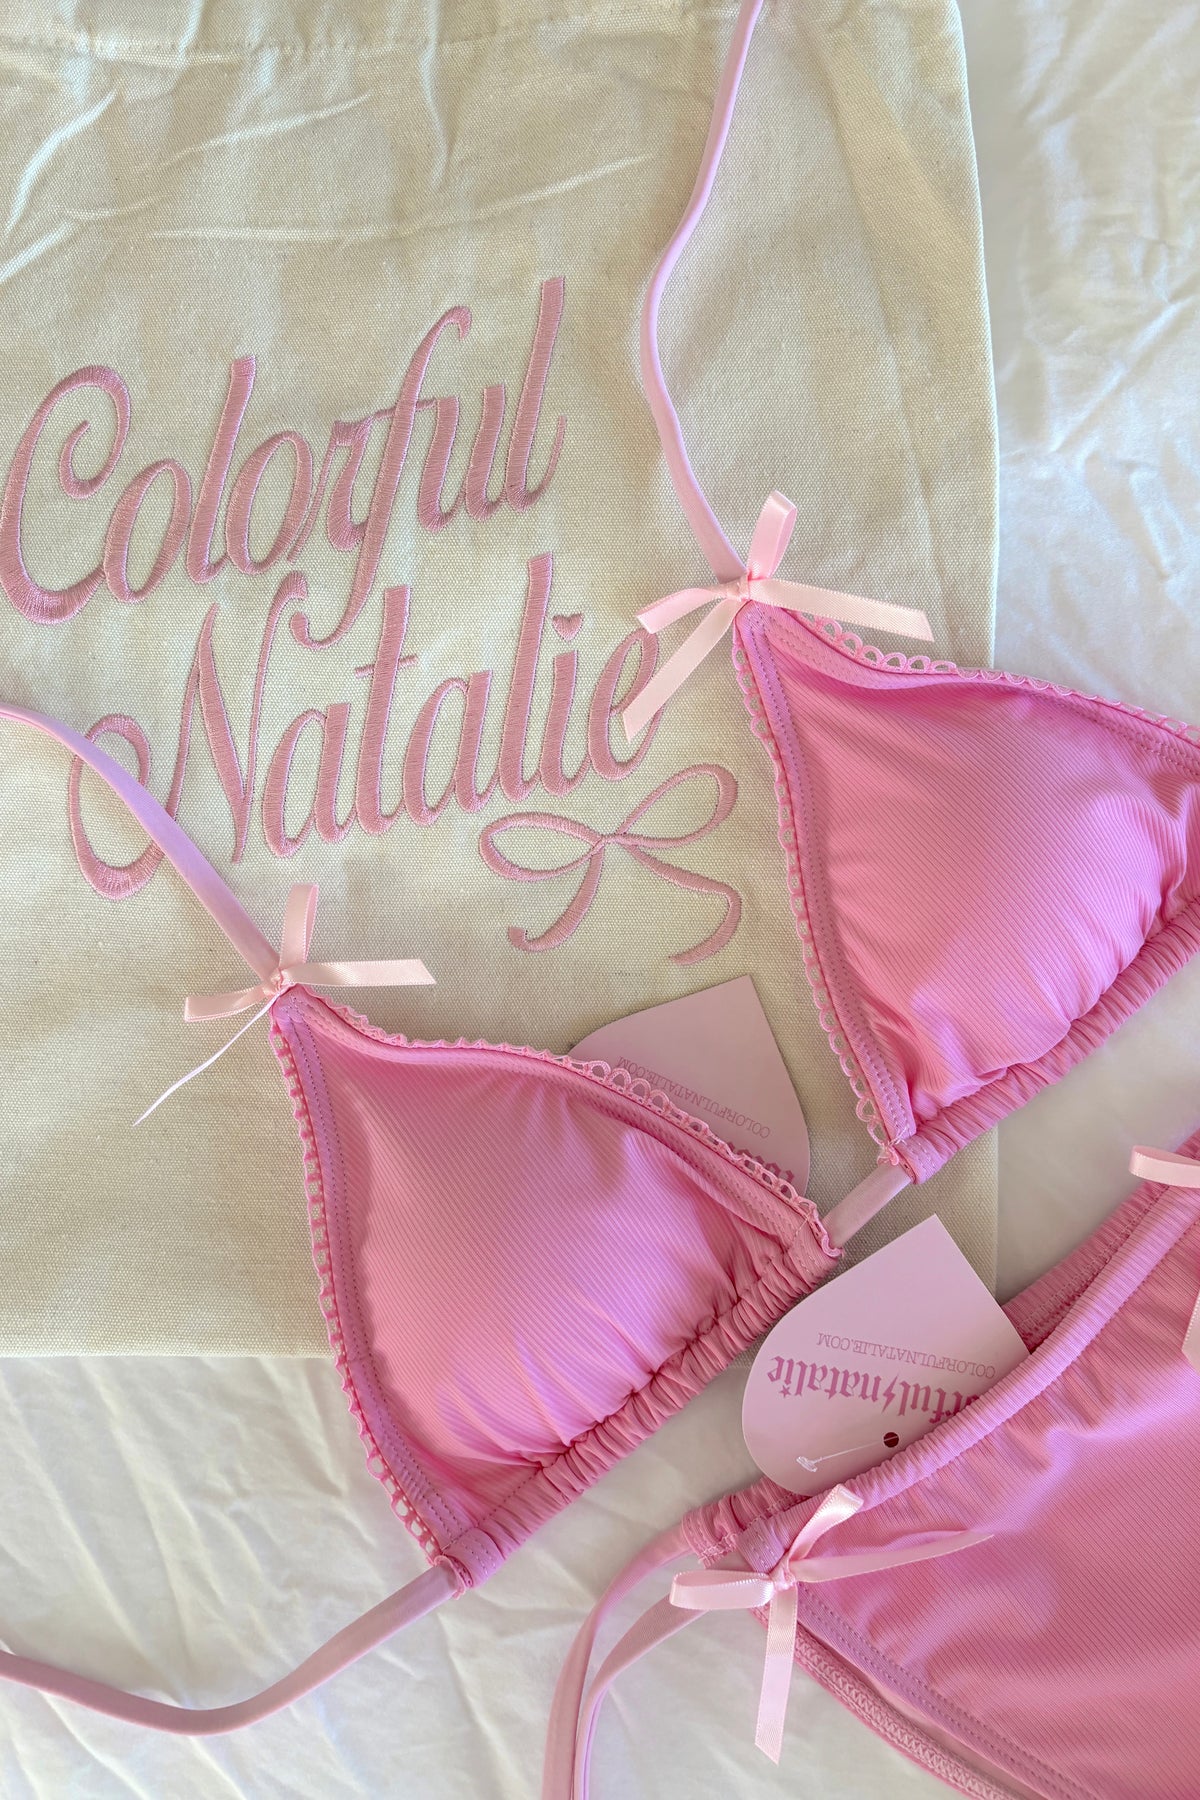 CN Embroidered Pink Bow Tote Bag